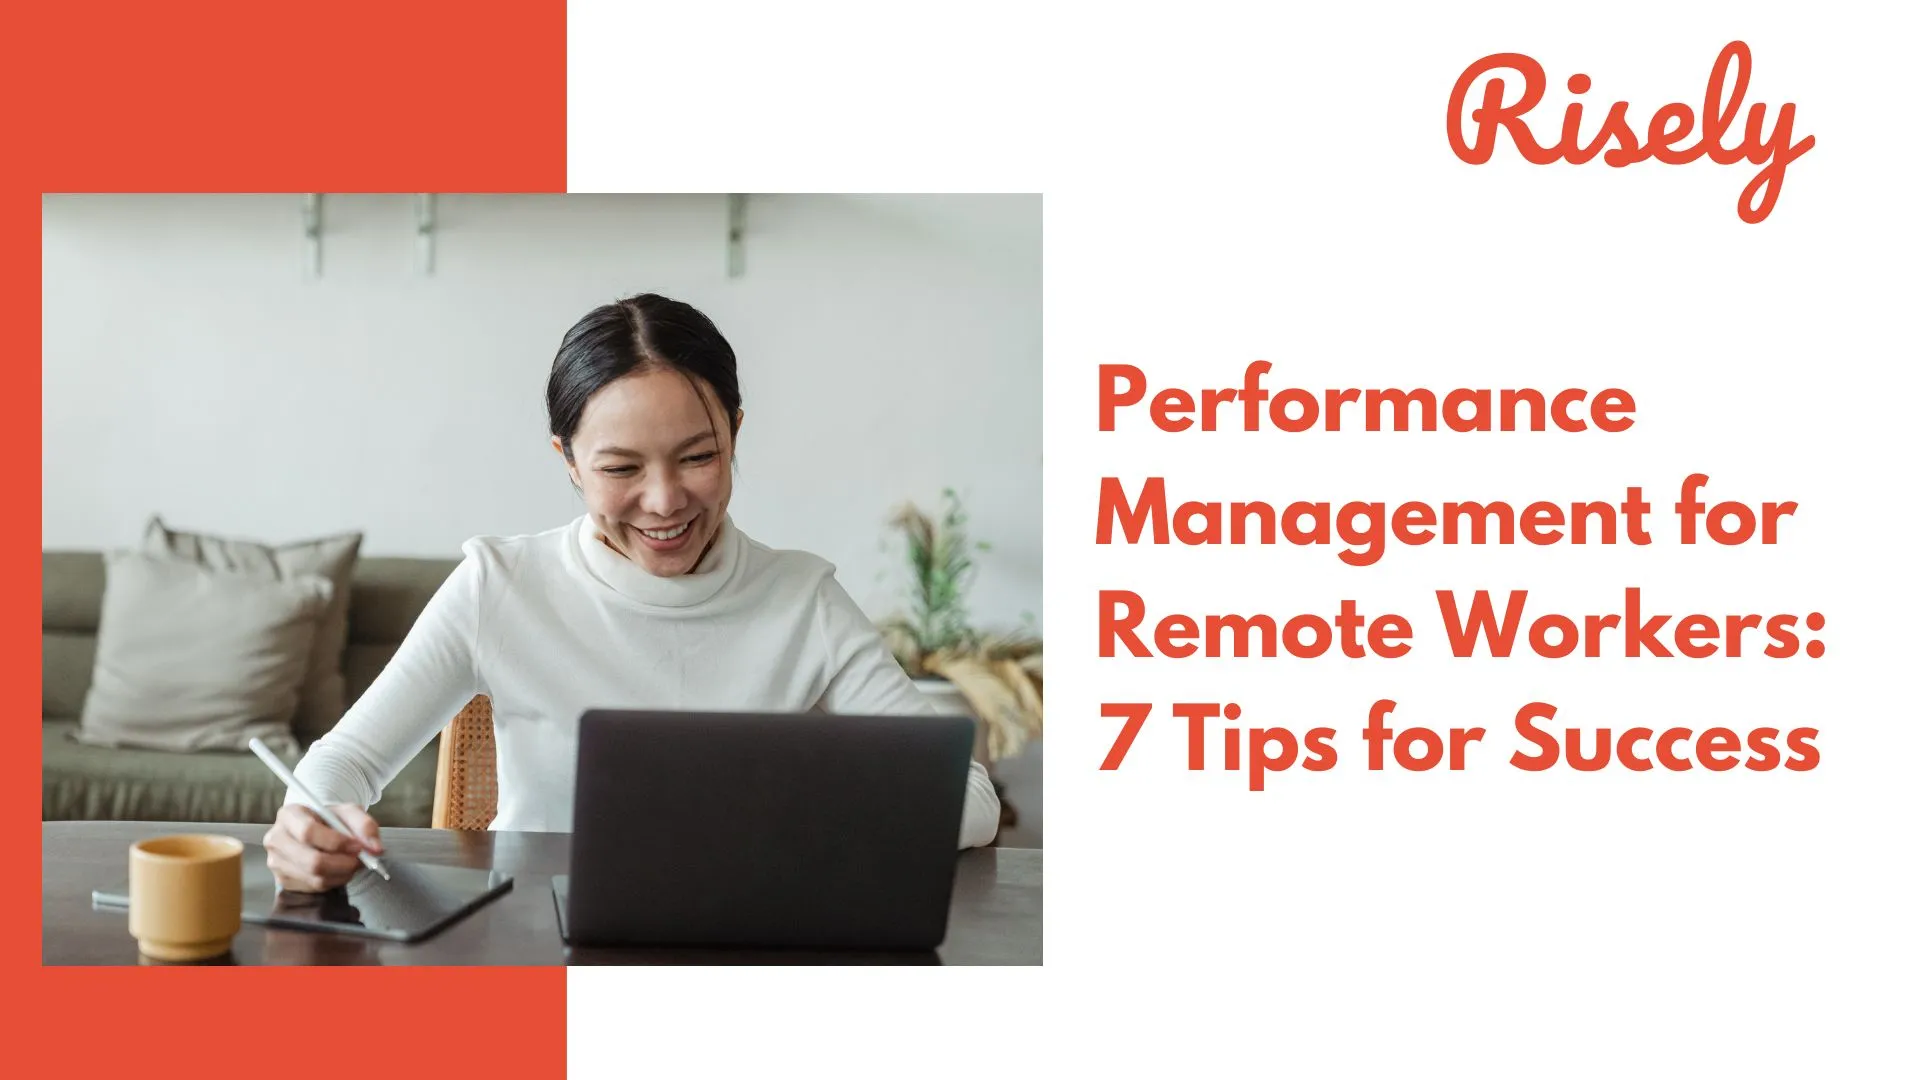 Performance Management for Remote Workers: 7 Tips for Success